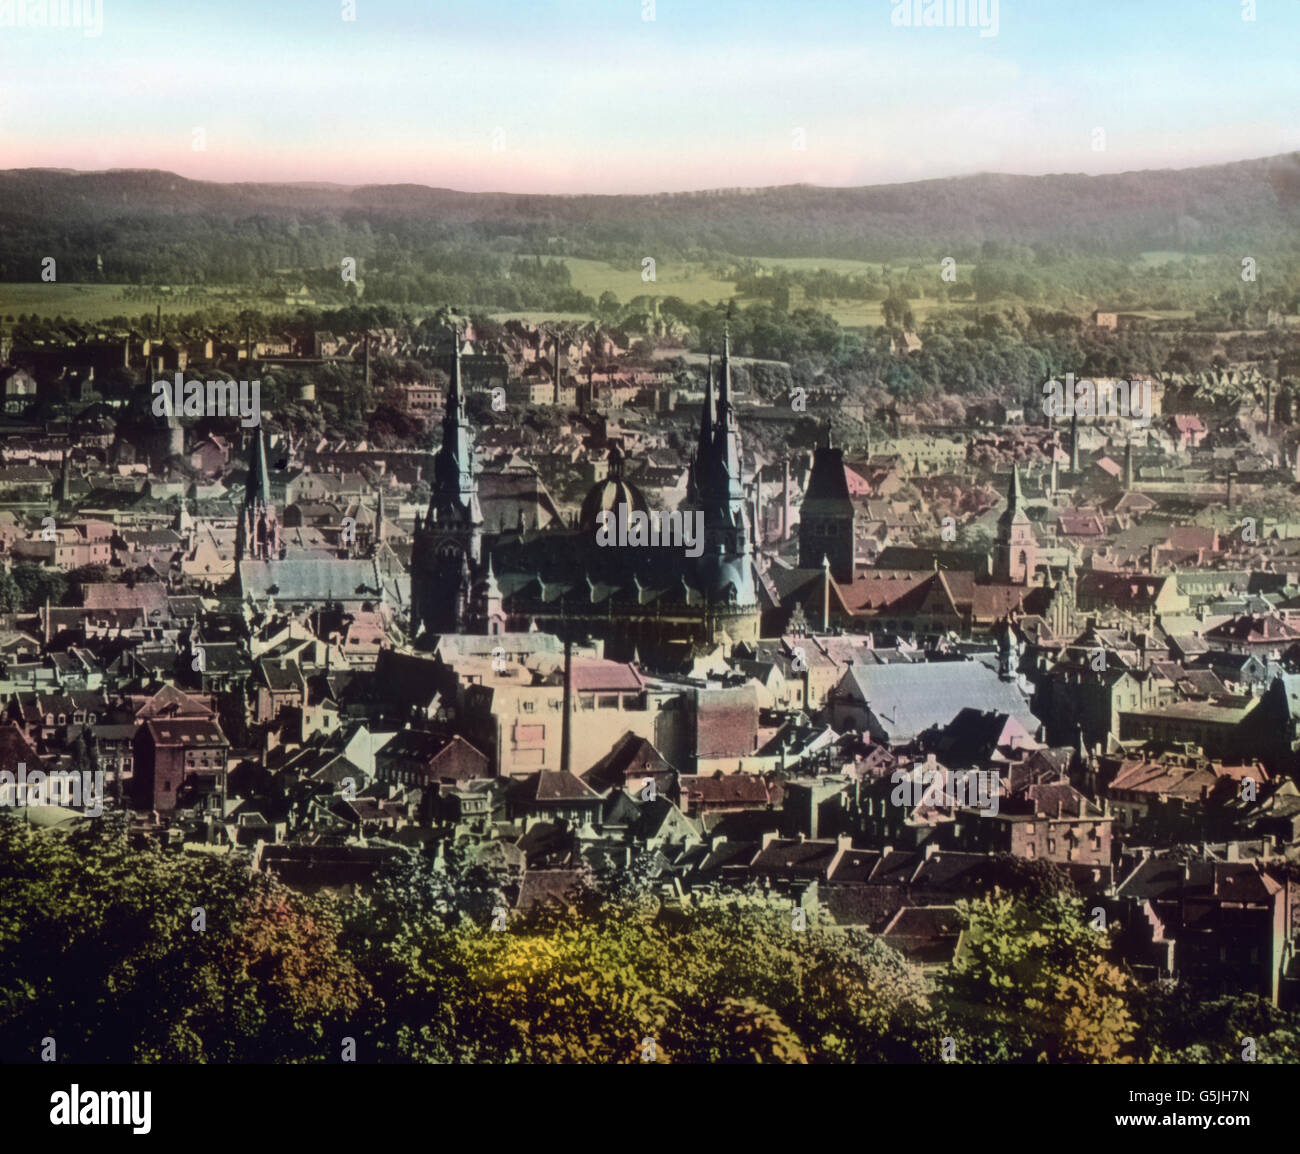 Blick auf die Stadt Aachen mit dem Dom im Zentrum, 1920er Jahre. View to the city of Aachen with its cathedral in the city centre, 1920s. Stock Photo